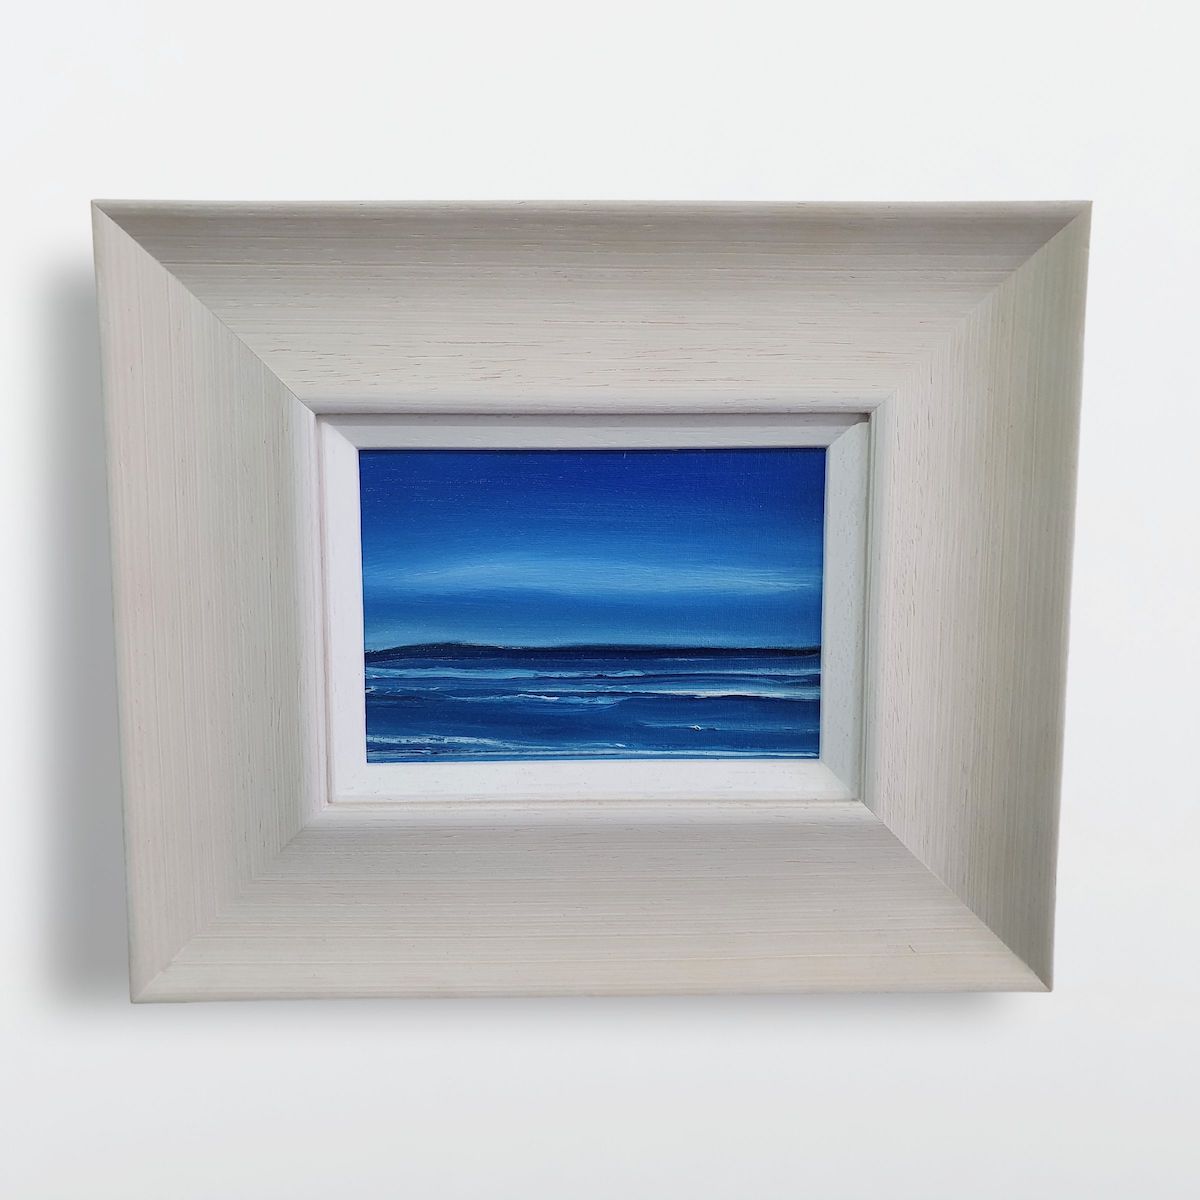 Blue Hebridean seascape oil painting set in a broad off-white frame.